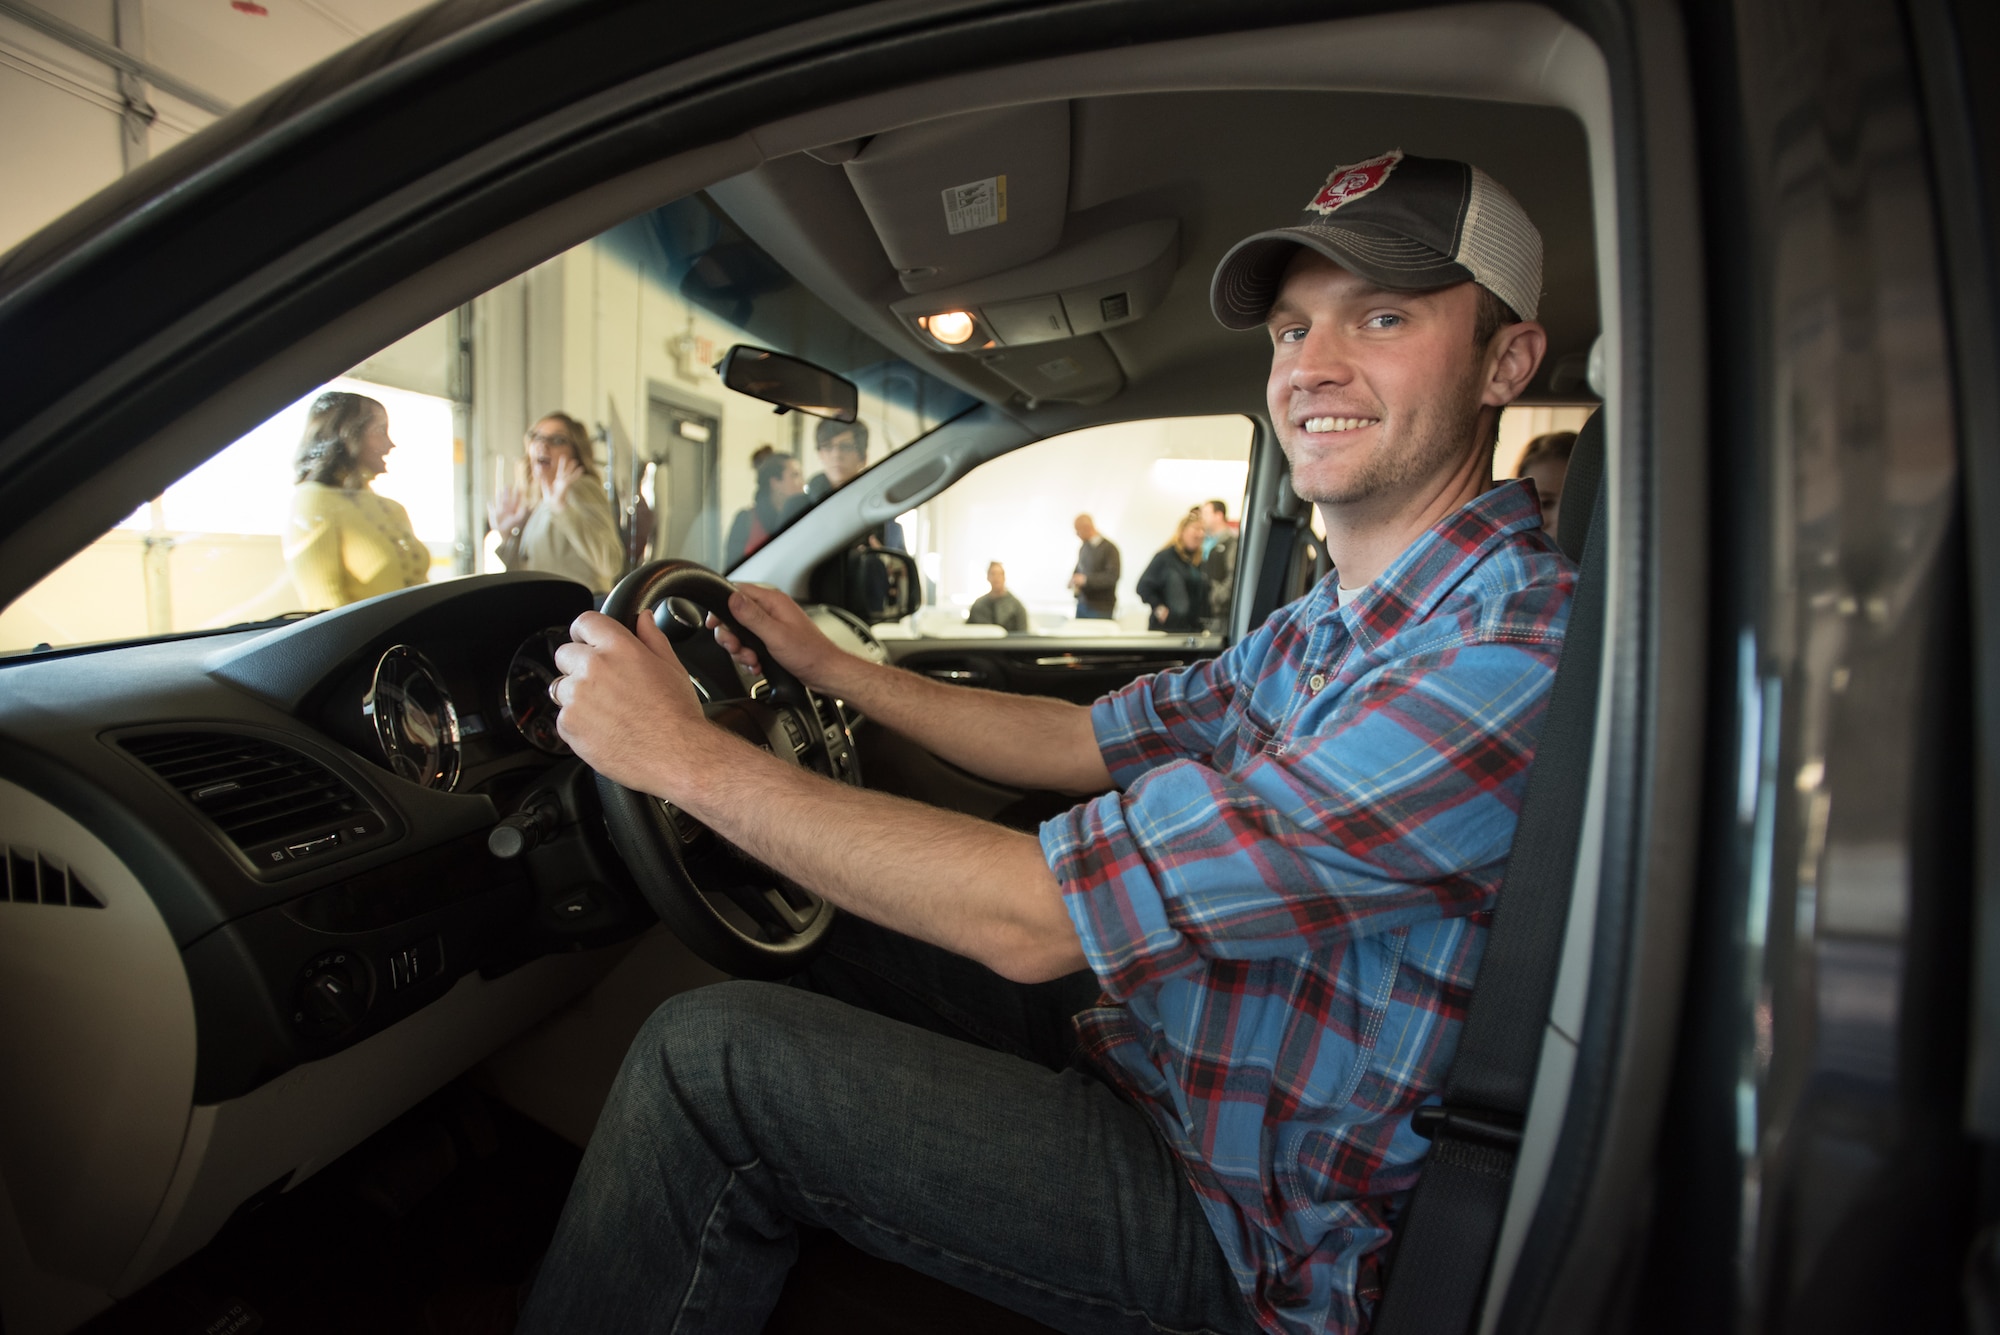 Staff Sgt. Neil Goodlin, a fire team member in the Kentucky Air National Guard’s 123rd Security Forces Squadron, sits behind the wheel of his family’s new minivan during an unveiling ceremony at Oxmoor Collision Center in Louisville, Ky., Nov. 20, 2015. The van was donated to Goodlin as part of the National Auto Body Council’s “Recycled Rides” program, which restores wrecked vehicles to like-new condition before giving them to needy individuals. (U.S. Air National Guard photo by Maj. Dale Greer)